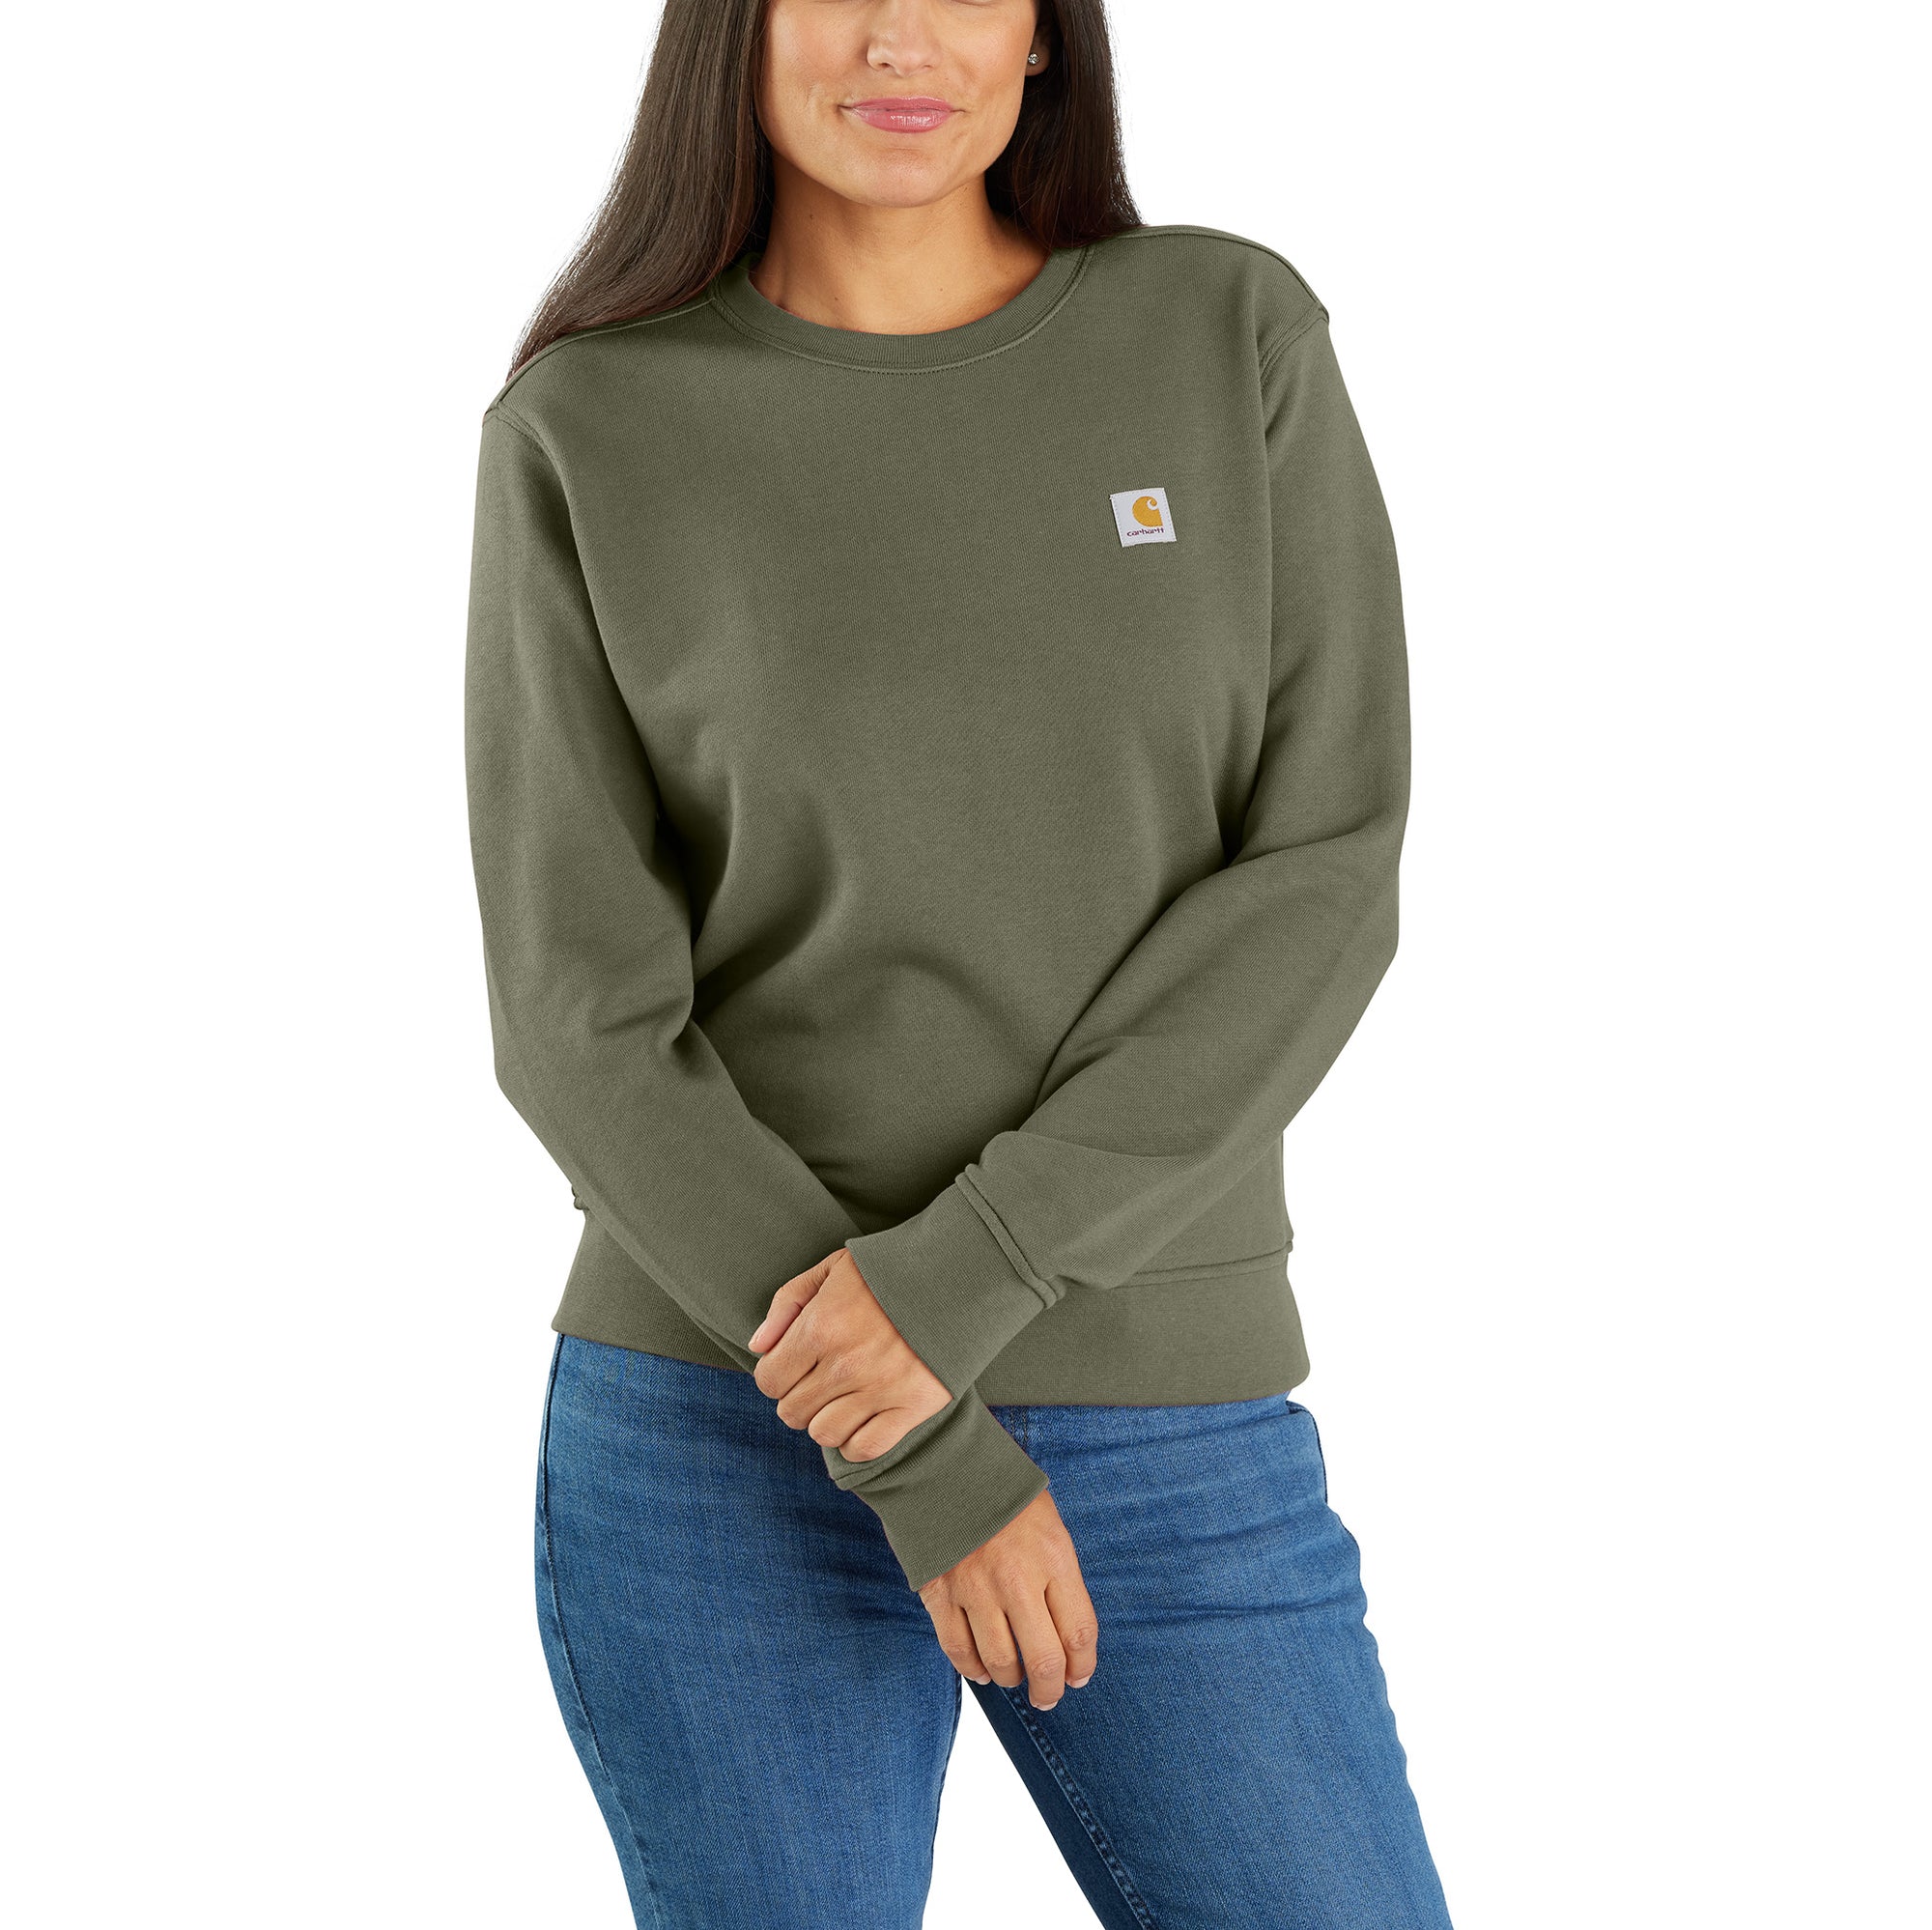 Carhartt Women's Relaxed Fit French Terry Crewneck Sweatshirt - Work World - Workwear, Work Boots, Safety Gear